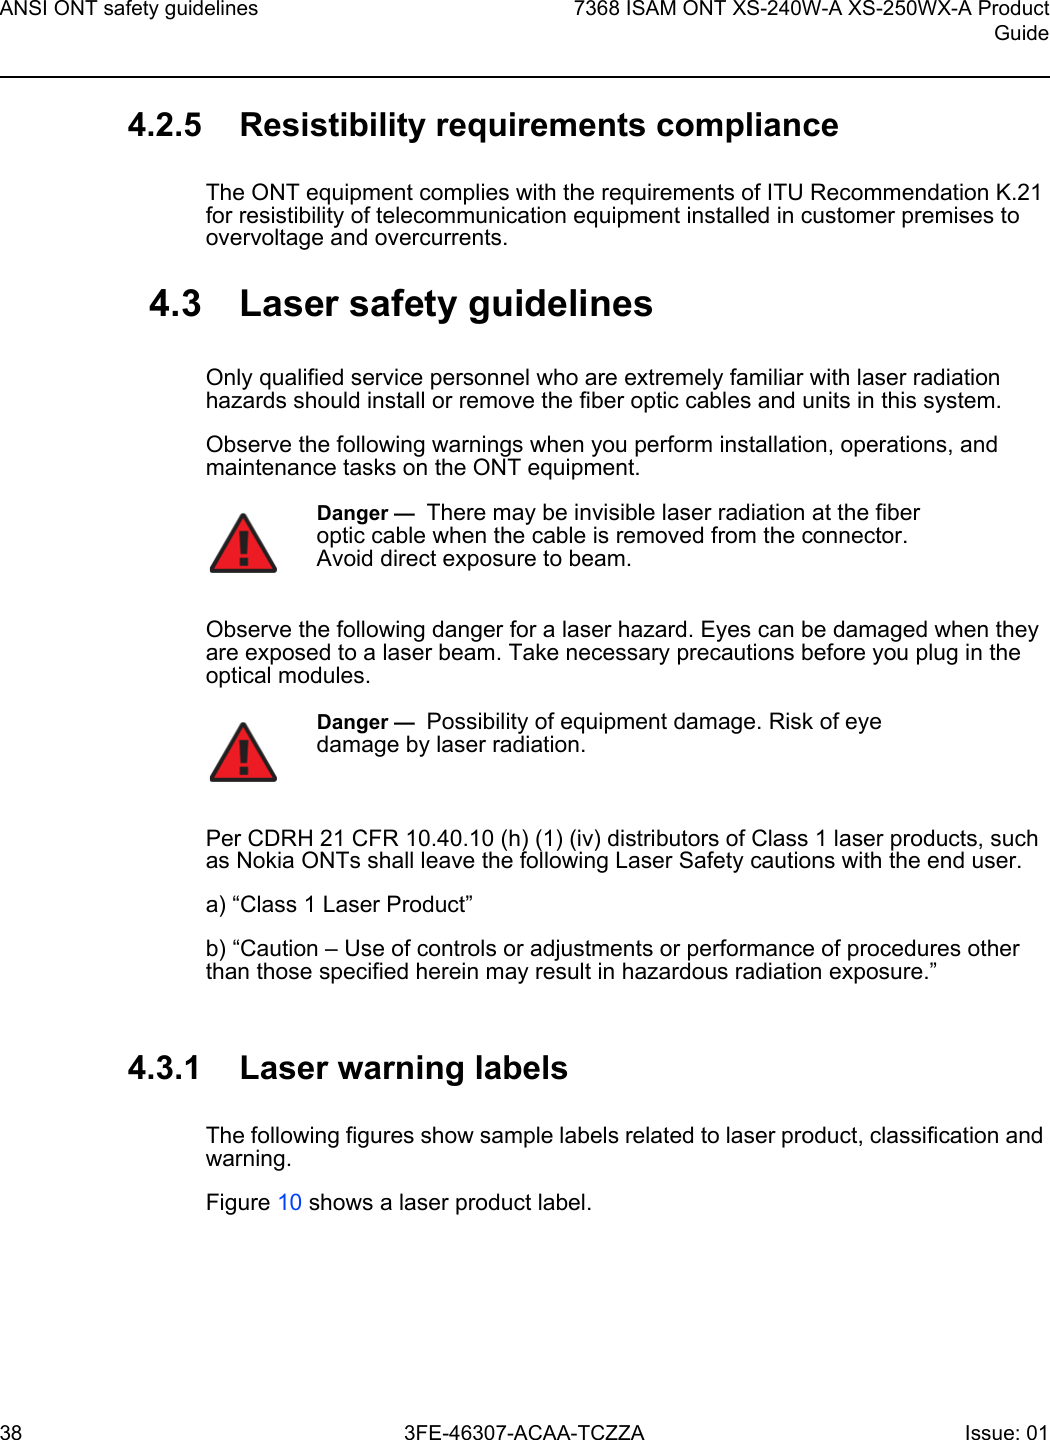 ANSI ONT safety guidelines387368 ISAM ONT XS-240W-A XS-250WX-A ProductGuide3FE-46307-ACAA-TCZZA Issue: 01 4.2.5 Resistibility requirements complianceThe ONT equipment complies with the requirements of ITU Recommendation K.21 for resistibility of telecommunication equipment installed in customer premises to overvoltage and overcurrents.4.3 Laser safety guidelinesOnly qualified service personnel who are extremely familiar with laser radiation hazards should install or remove the fiber optic cables and units in this system.Observe the following warnings when you perform installation, operations, and maintenance tasks on the ONT equipment.Observe the following danger for a laser hazard. Eyes can be damaged when they are exposed to a laser beam. Take necessary precautions before you plug in the optical modules.Per CDRH 21 CFR 10.40.10 (h) (1) (iv) distributors of Class 1 laser products, such as Nokia ONTs shall leave the following Laser Safety cautions with the end user.a) “Class 1 Laser Product”b) “Caution – Use of controls or adjustments or performance of procedures other than those specified herein may result in hazardous radiation exposure.”4.3.1 Laser warning labelsThe following figures show sample labels related to laser product, classification and warning. Figure 10 shows a laser product label.Danger —  There may be invisible laser radiation at the fiber optic cable when the cable is removed from the connector. Avoid direct exposure to beam.Danger —  Possibility of equipment damage. Risk of eye damage by laser radiation.